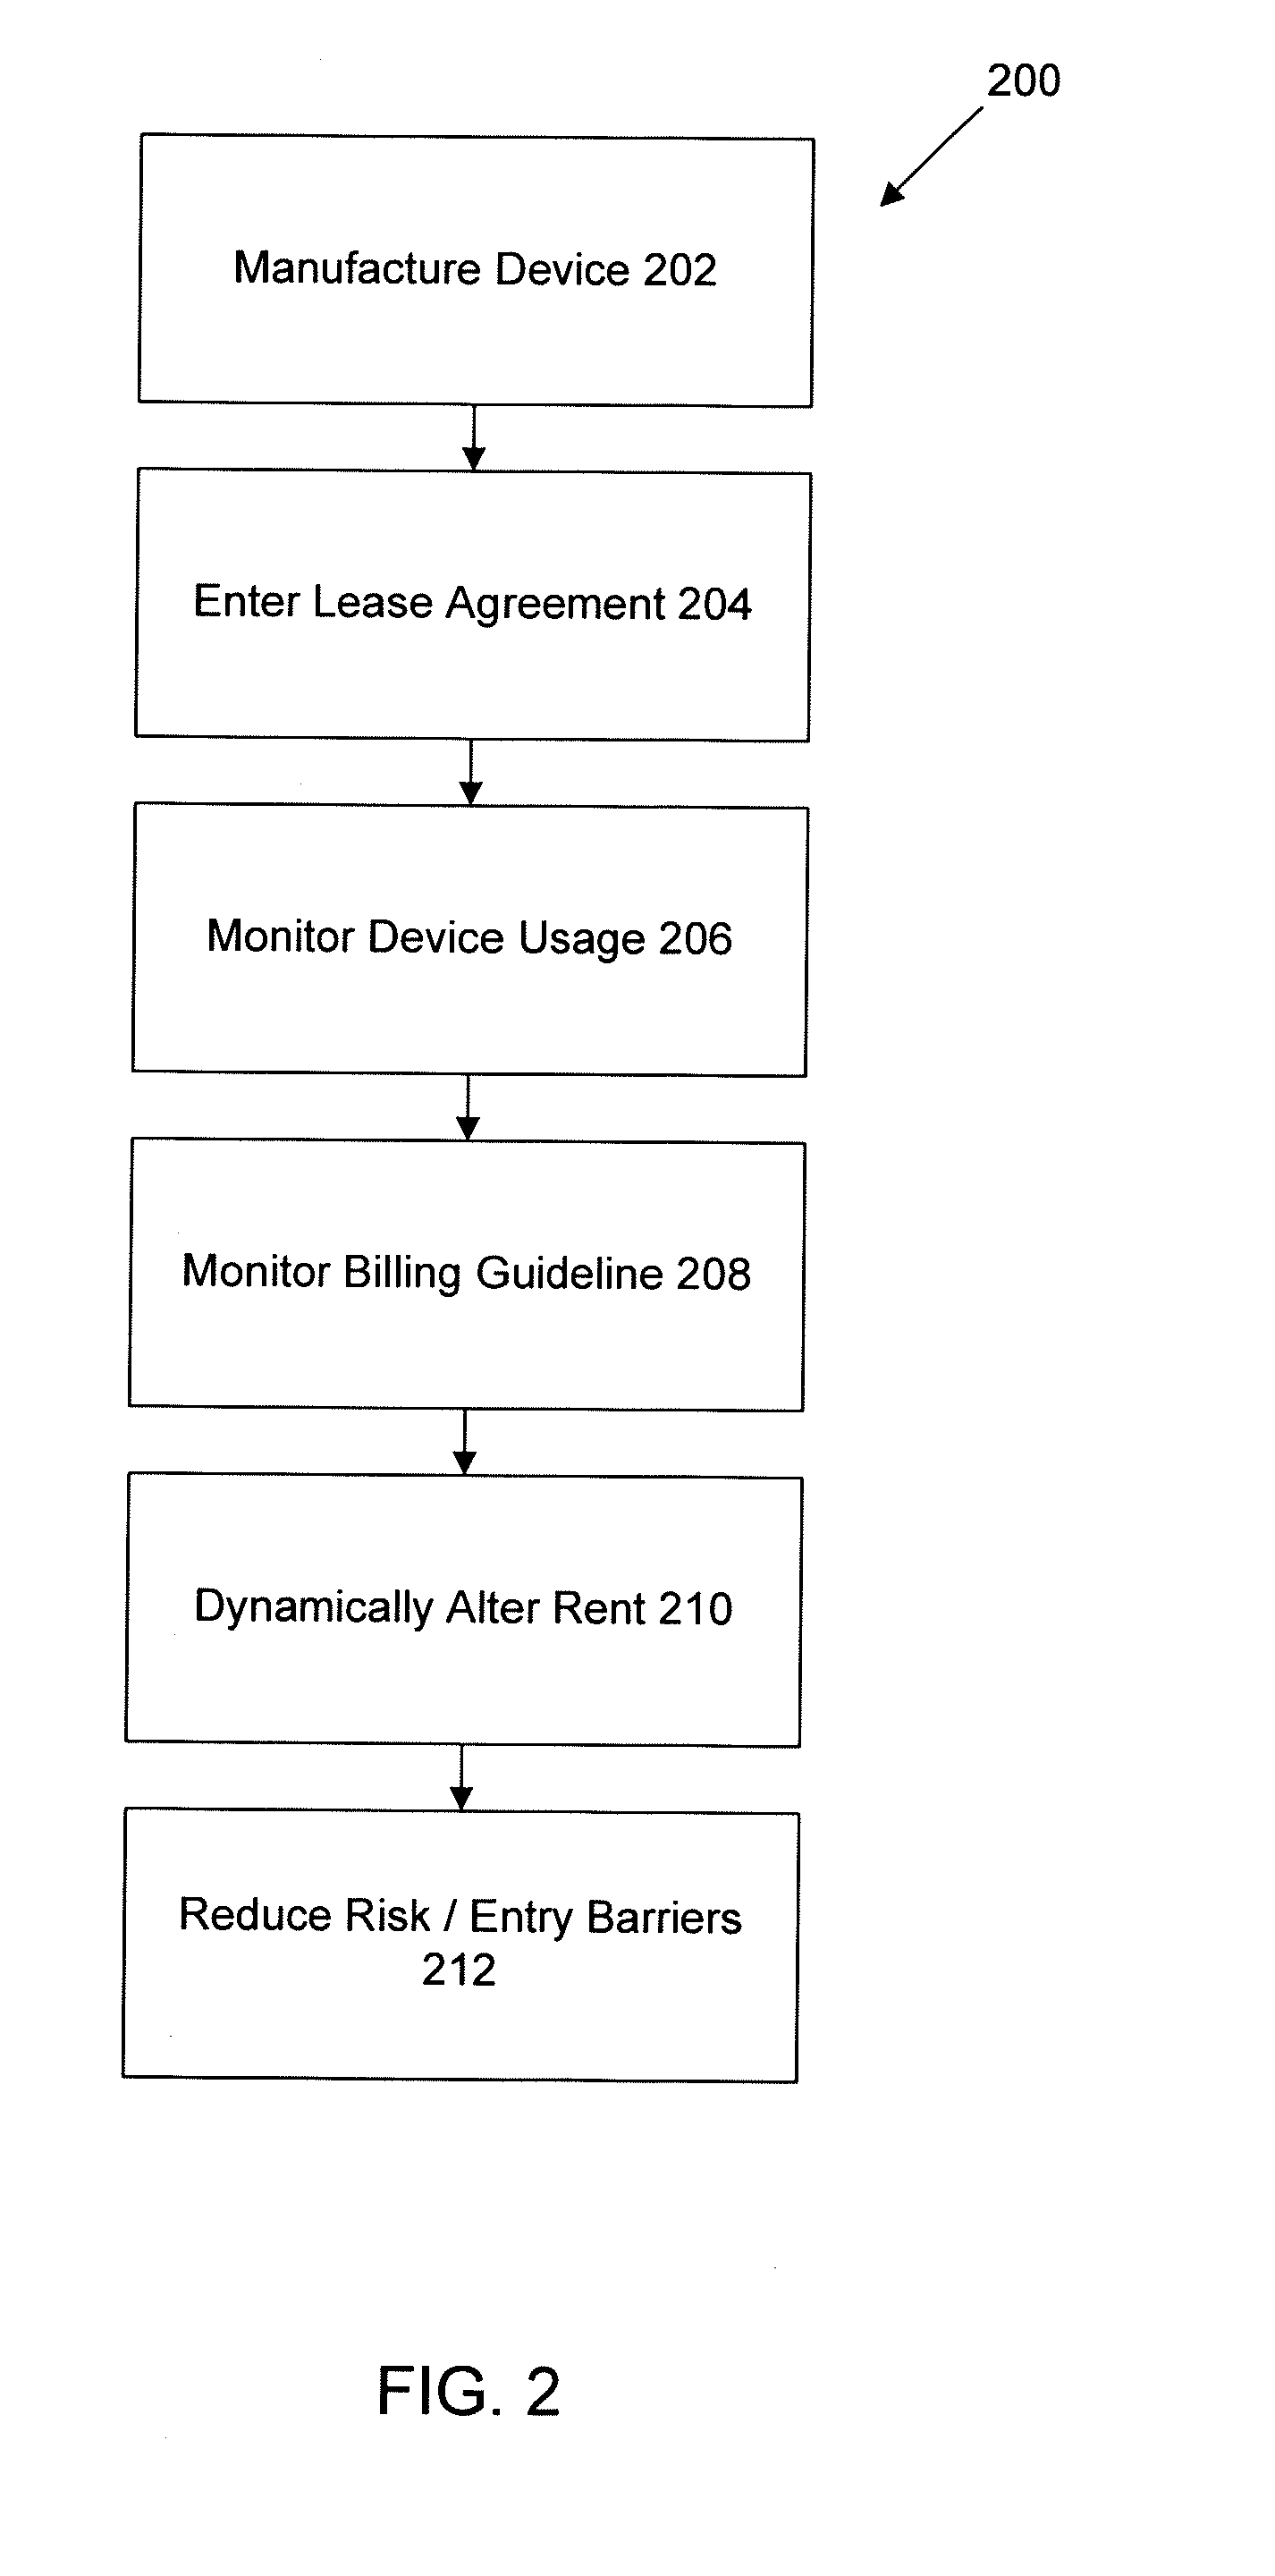 Business model of a billing procedure for renting medical equipment